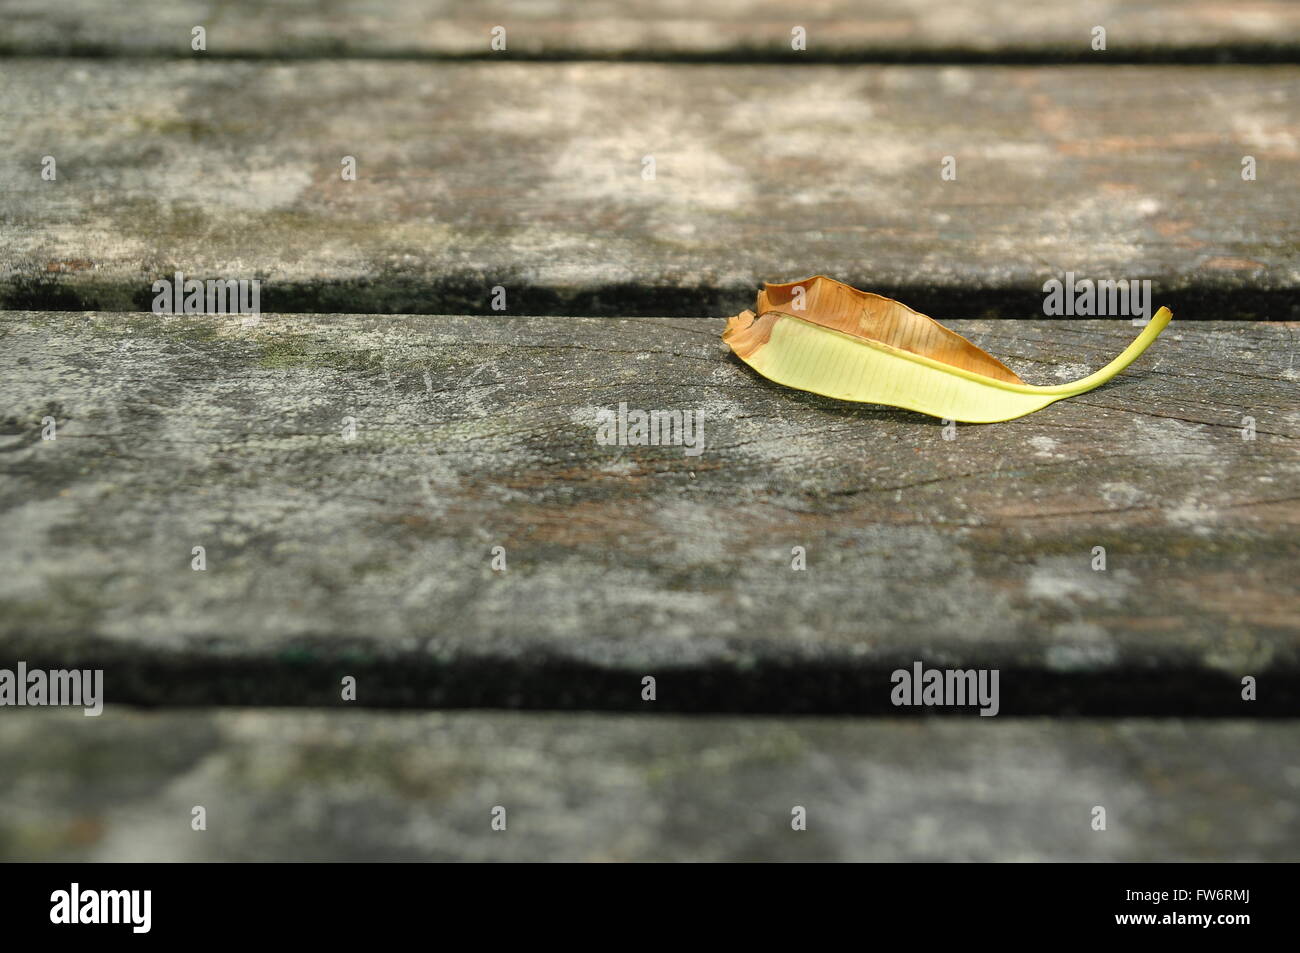 Half-dried leaf fell onto the wooden table Stock Photo